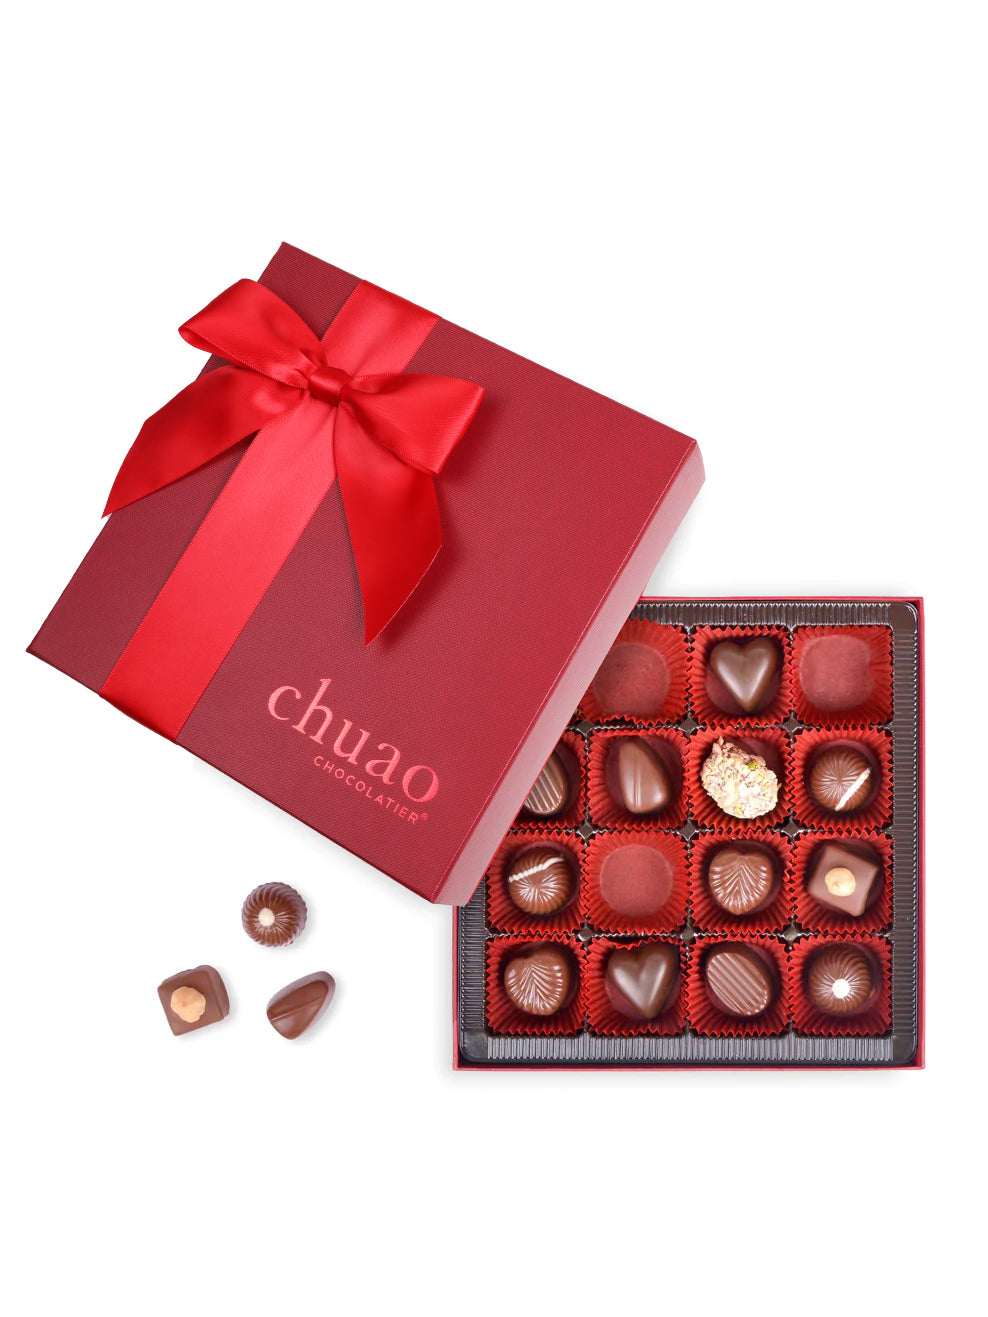 16 pieces of milk chocolate bonbons and truffles in a red gift box